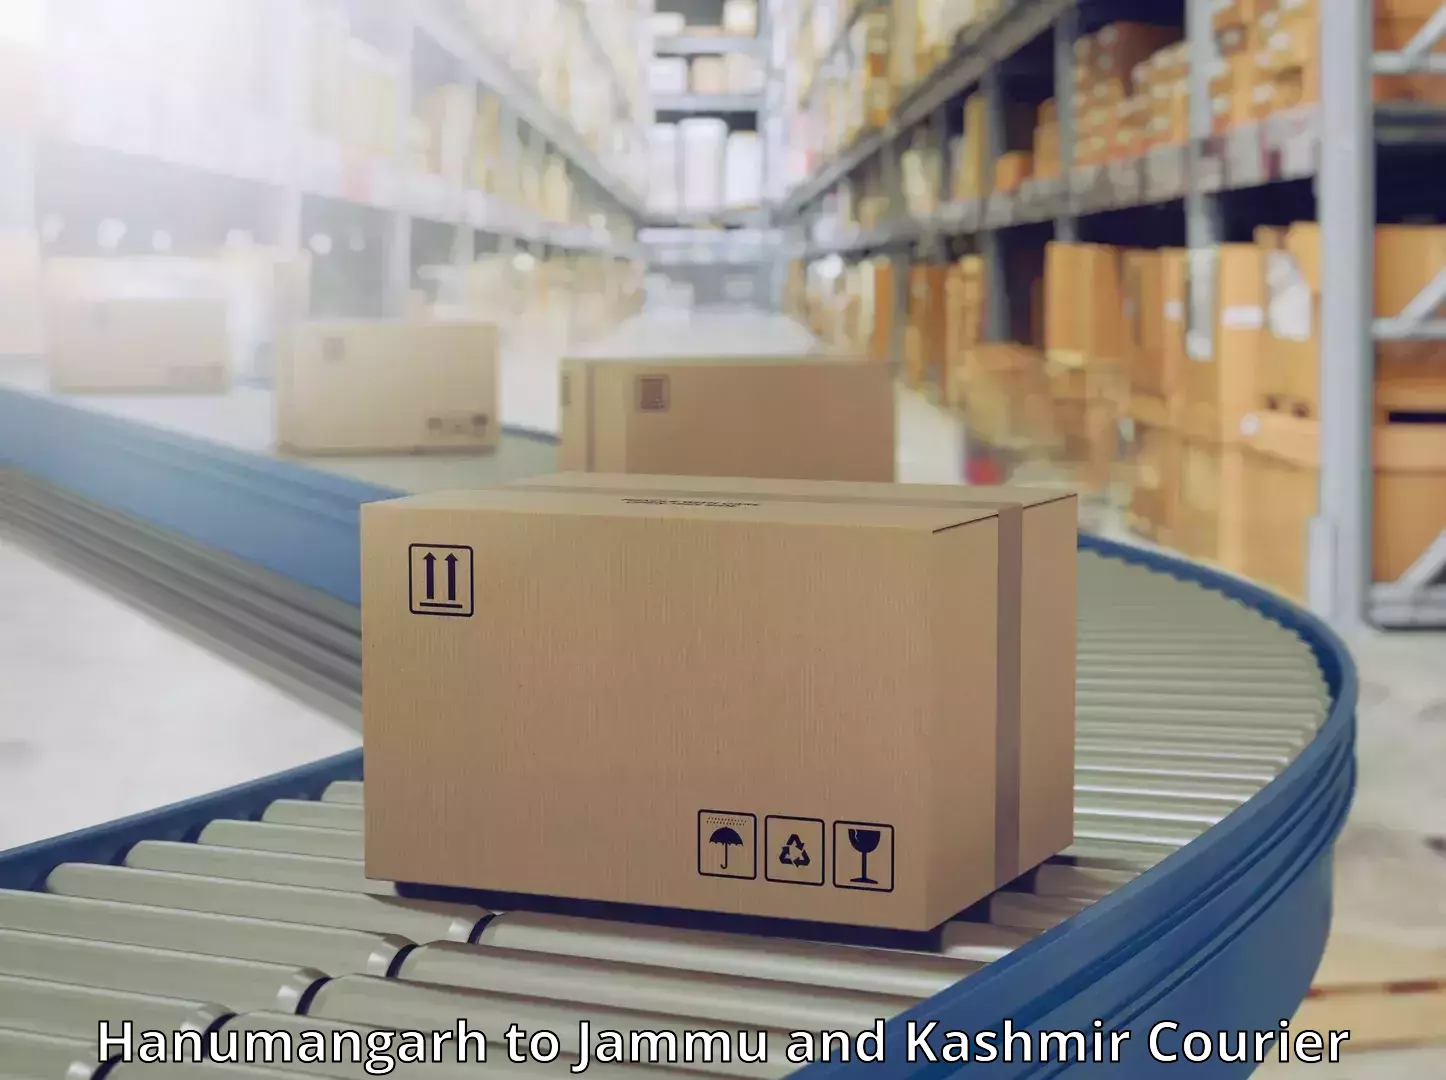 Quality courier partnerships in Hanumangarh to Baramulla